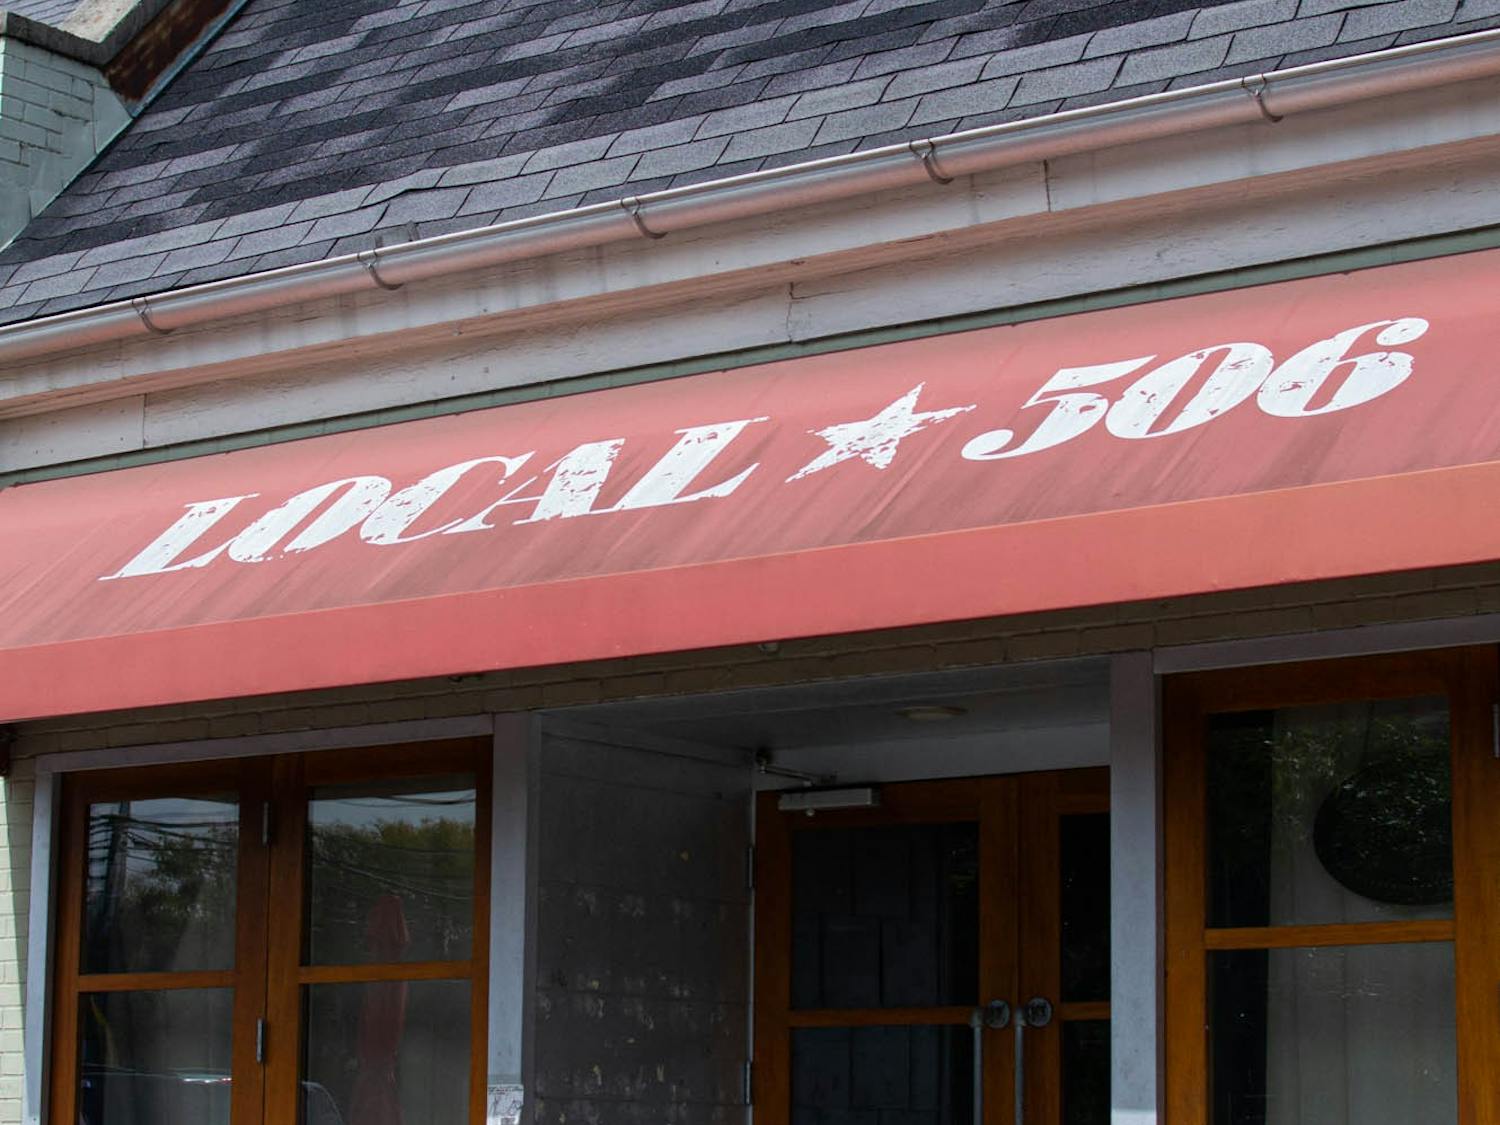 Local 506, a music venue in Chapel Hill, pictured on Sunday, Oct. 4, 2020.